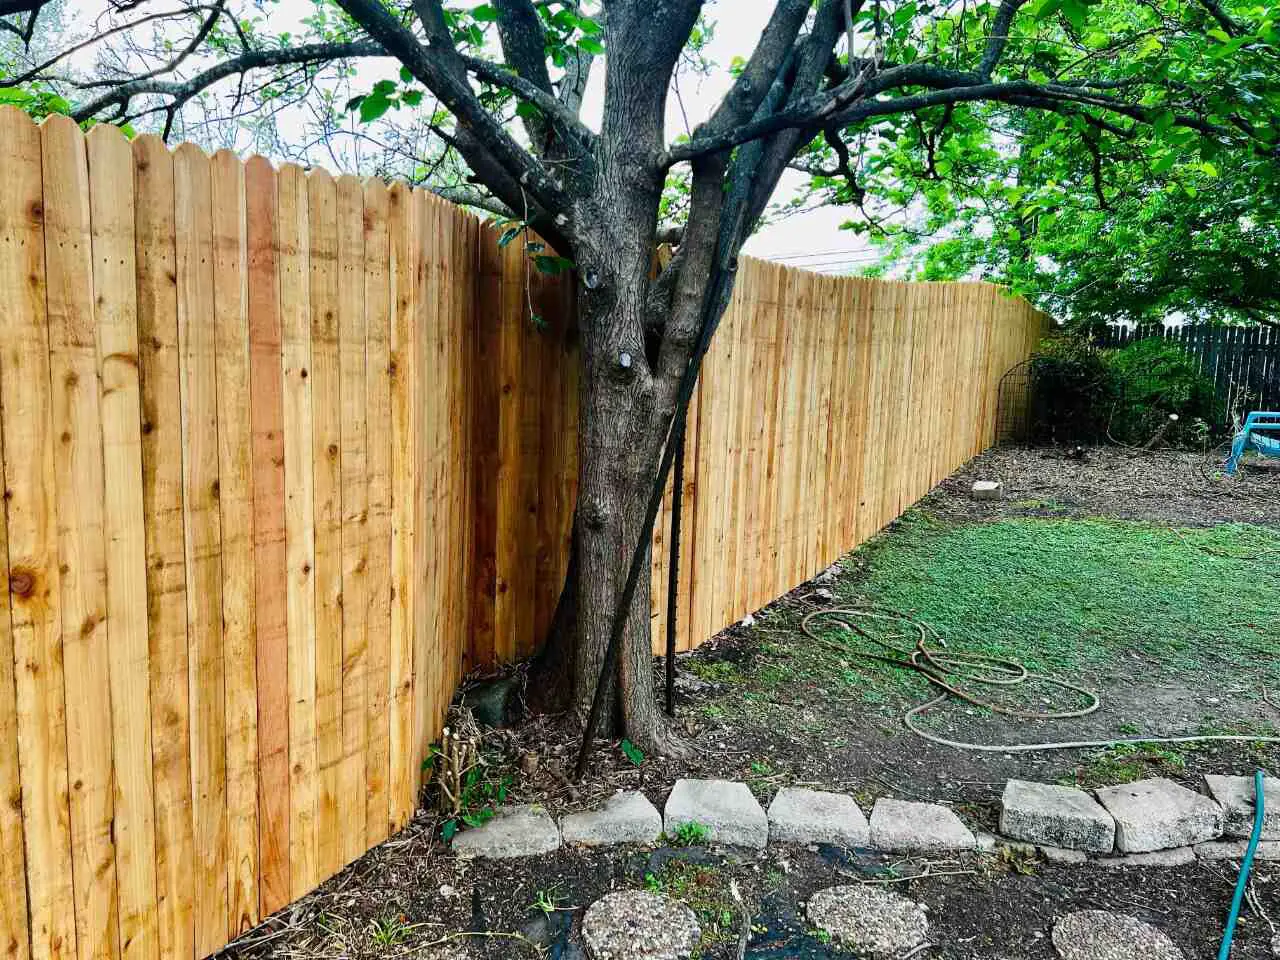 Dog ear wood picket fence next to a tree on a slightly sloped backyard of a Central Texas home